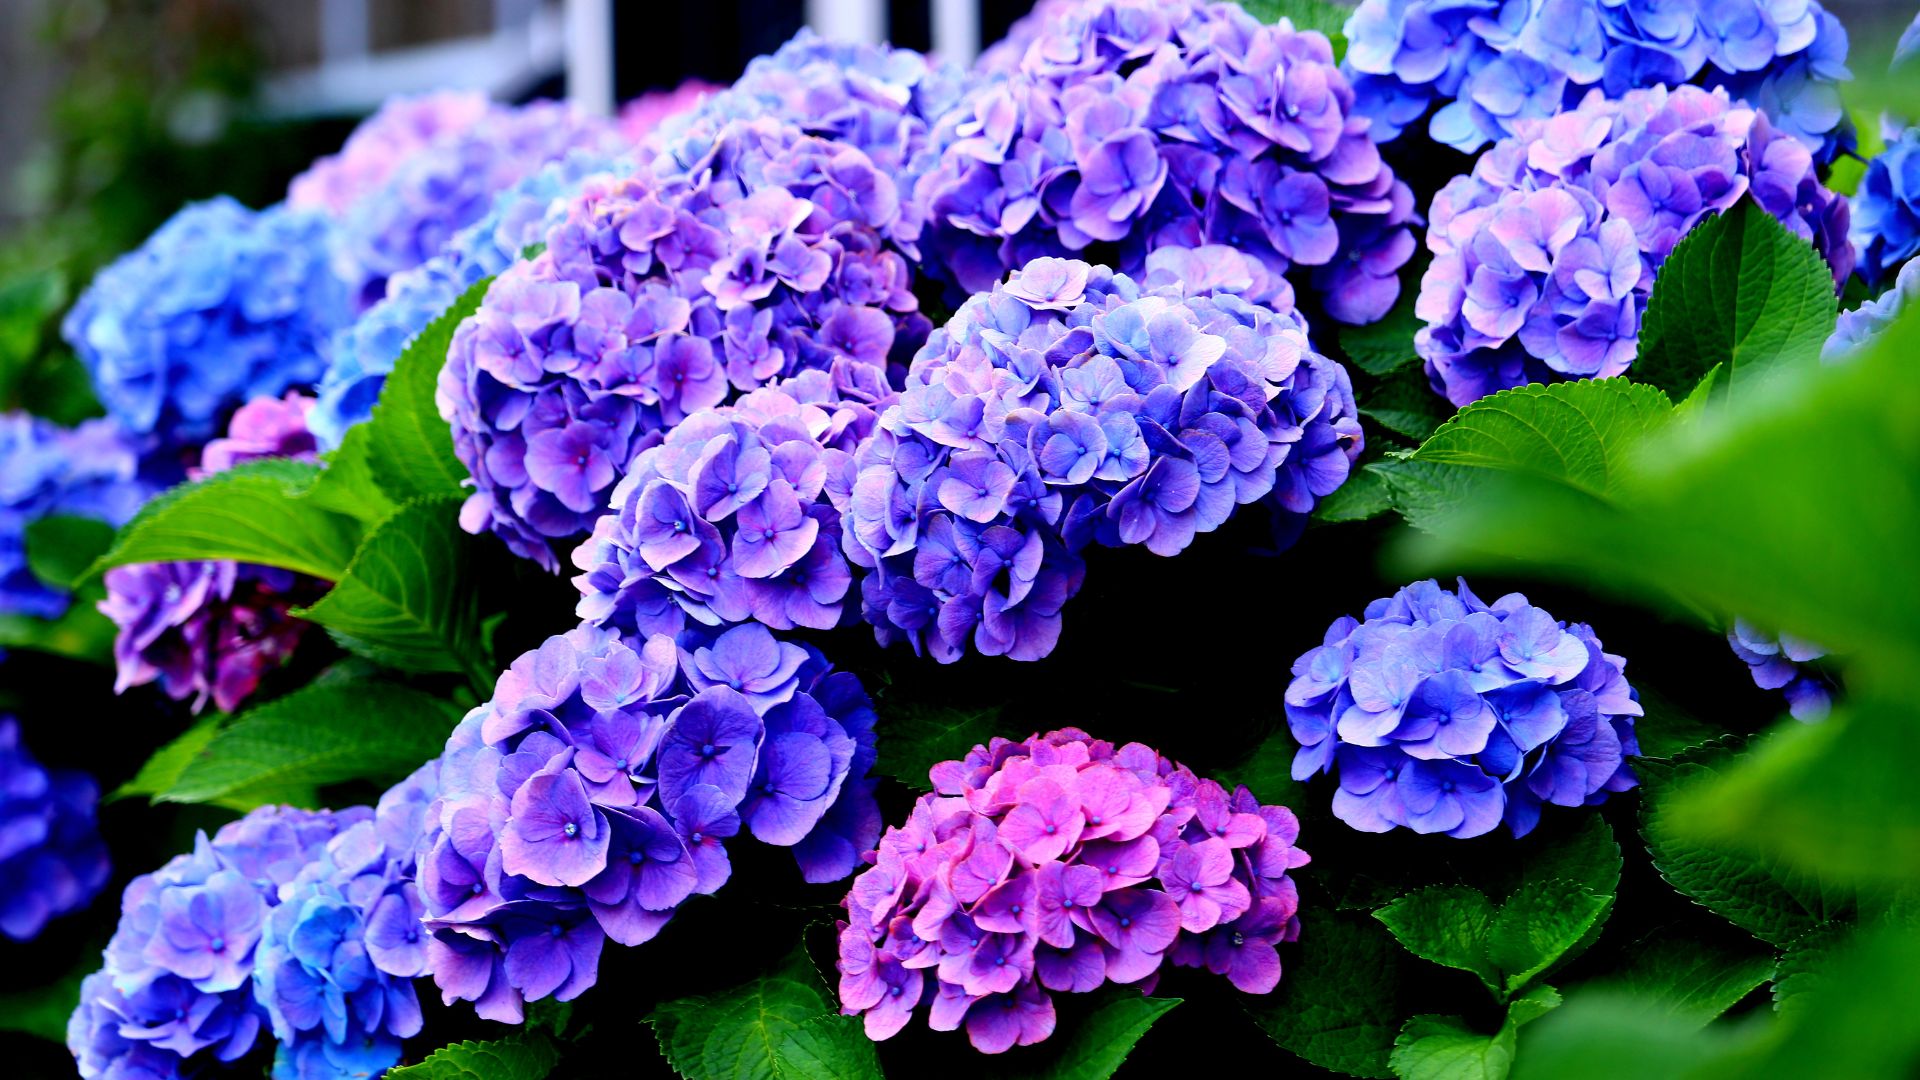 To Cover Or Not To Cover Your Hydrangeas In The Spring Frost, That Is The Question 